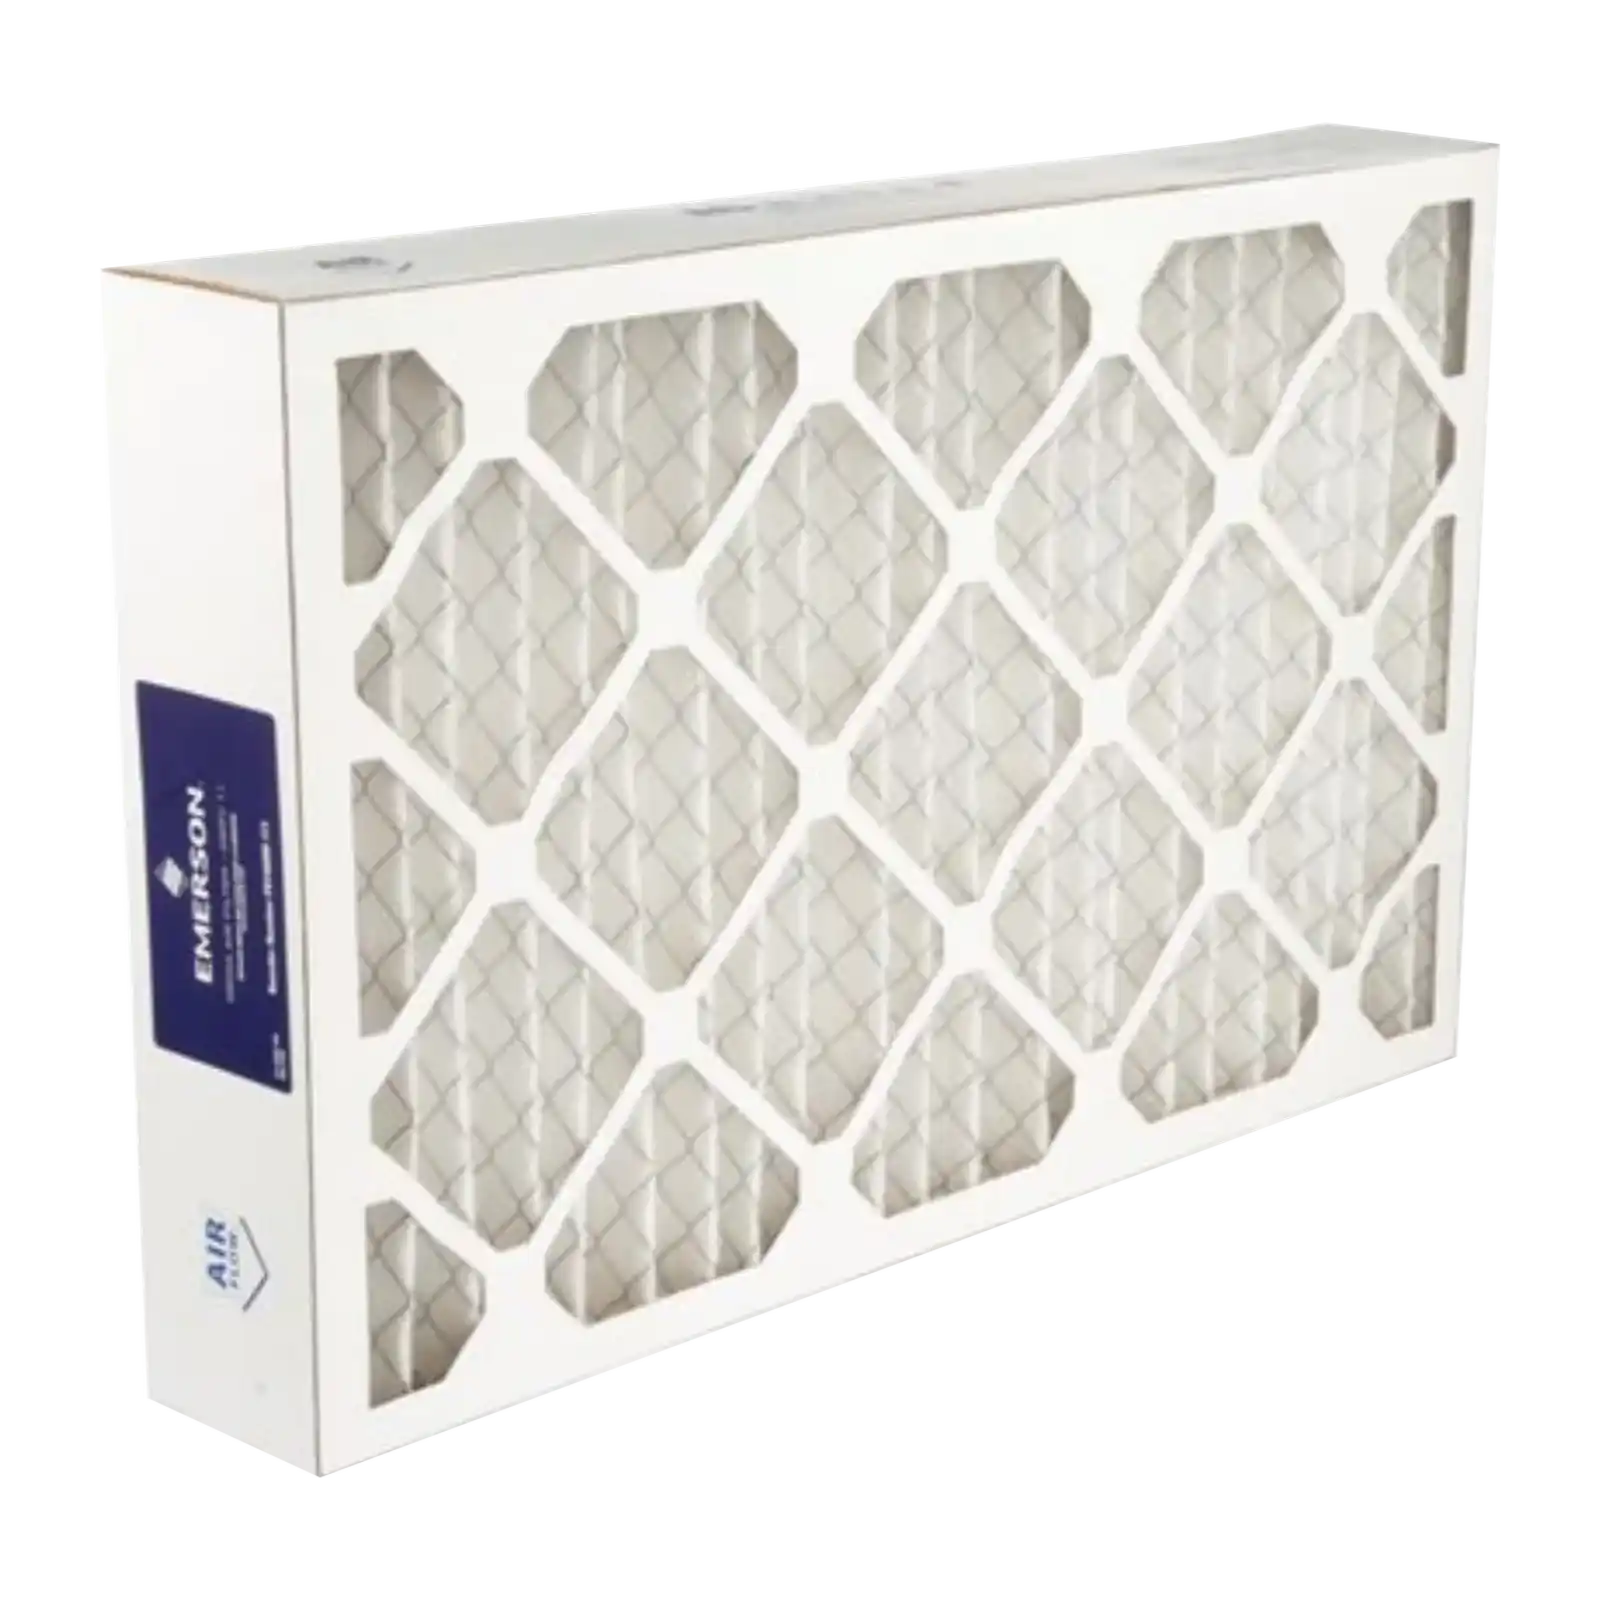 White‐Rodgers FR1400‐100 16x25x5 Furnace Filter